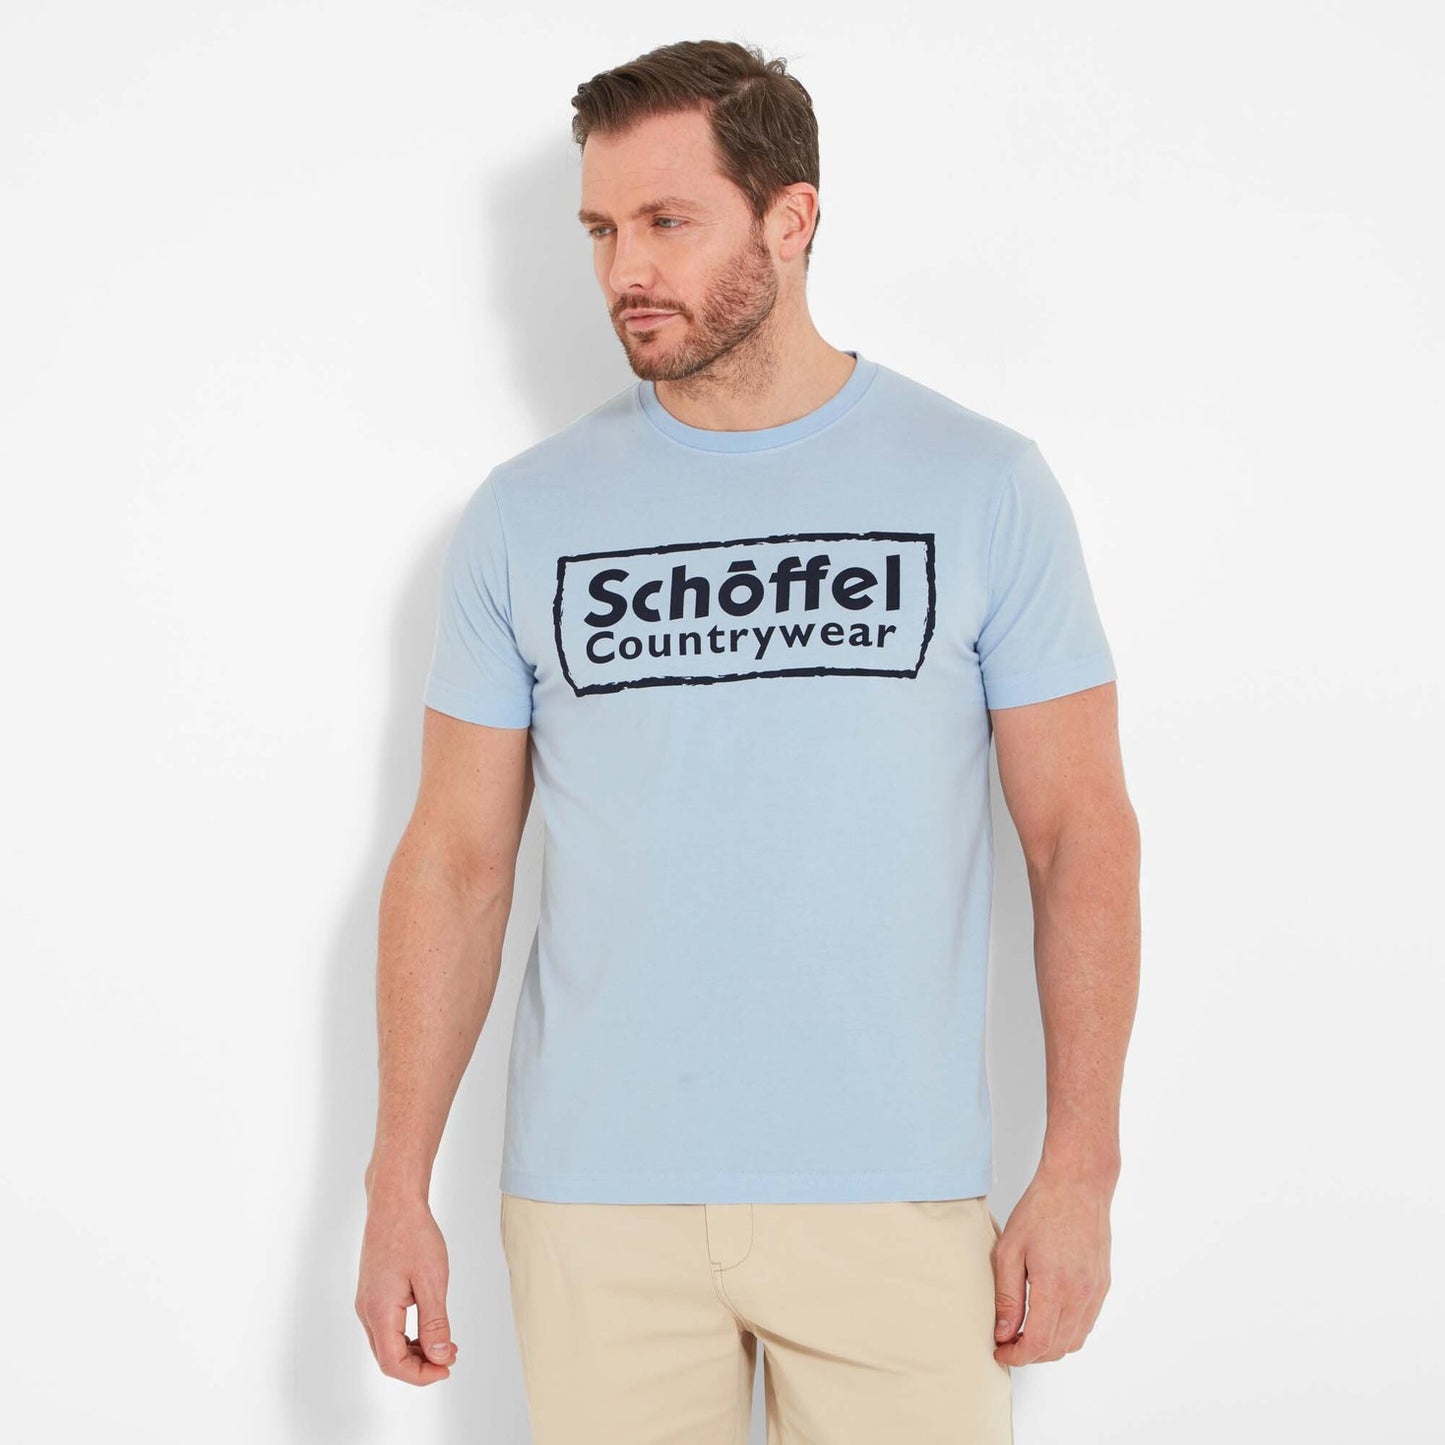 Schoffel T Shirts, the Heritage T Shirt